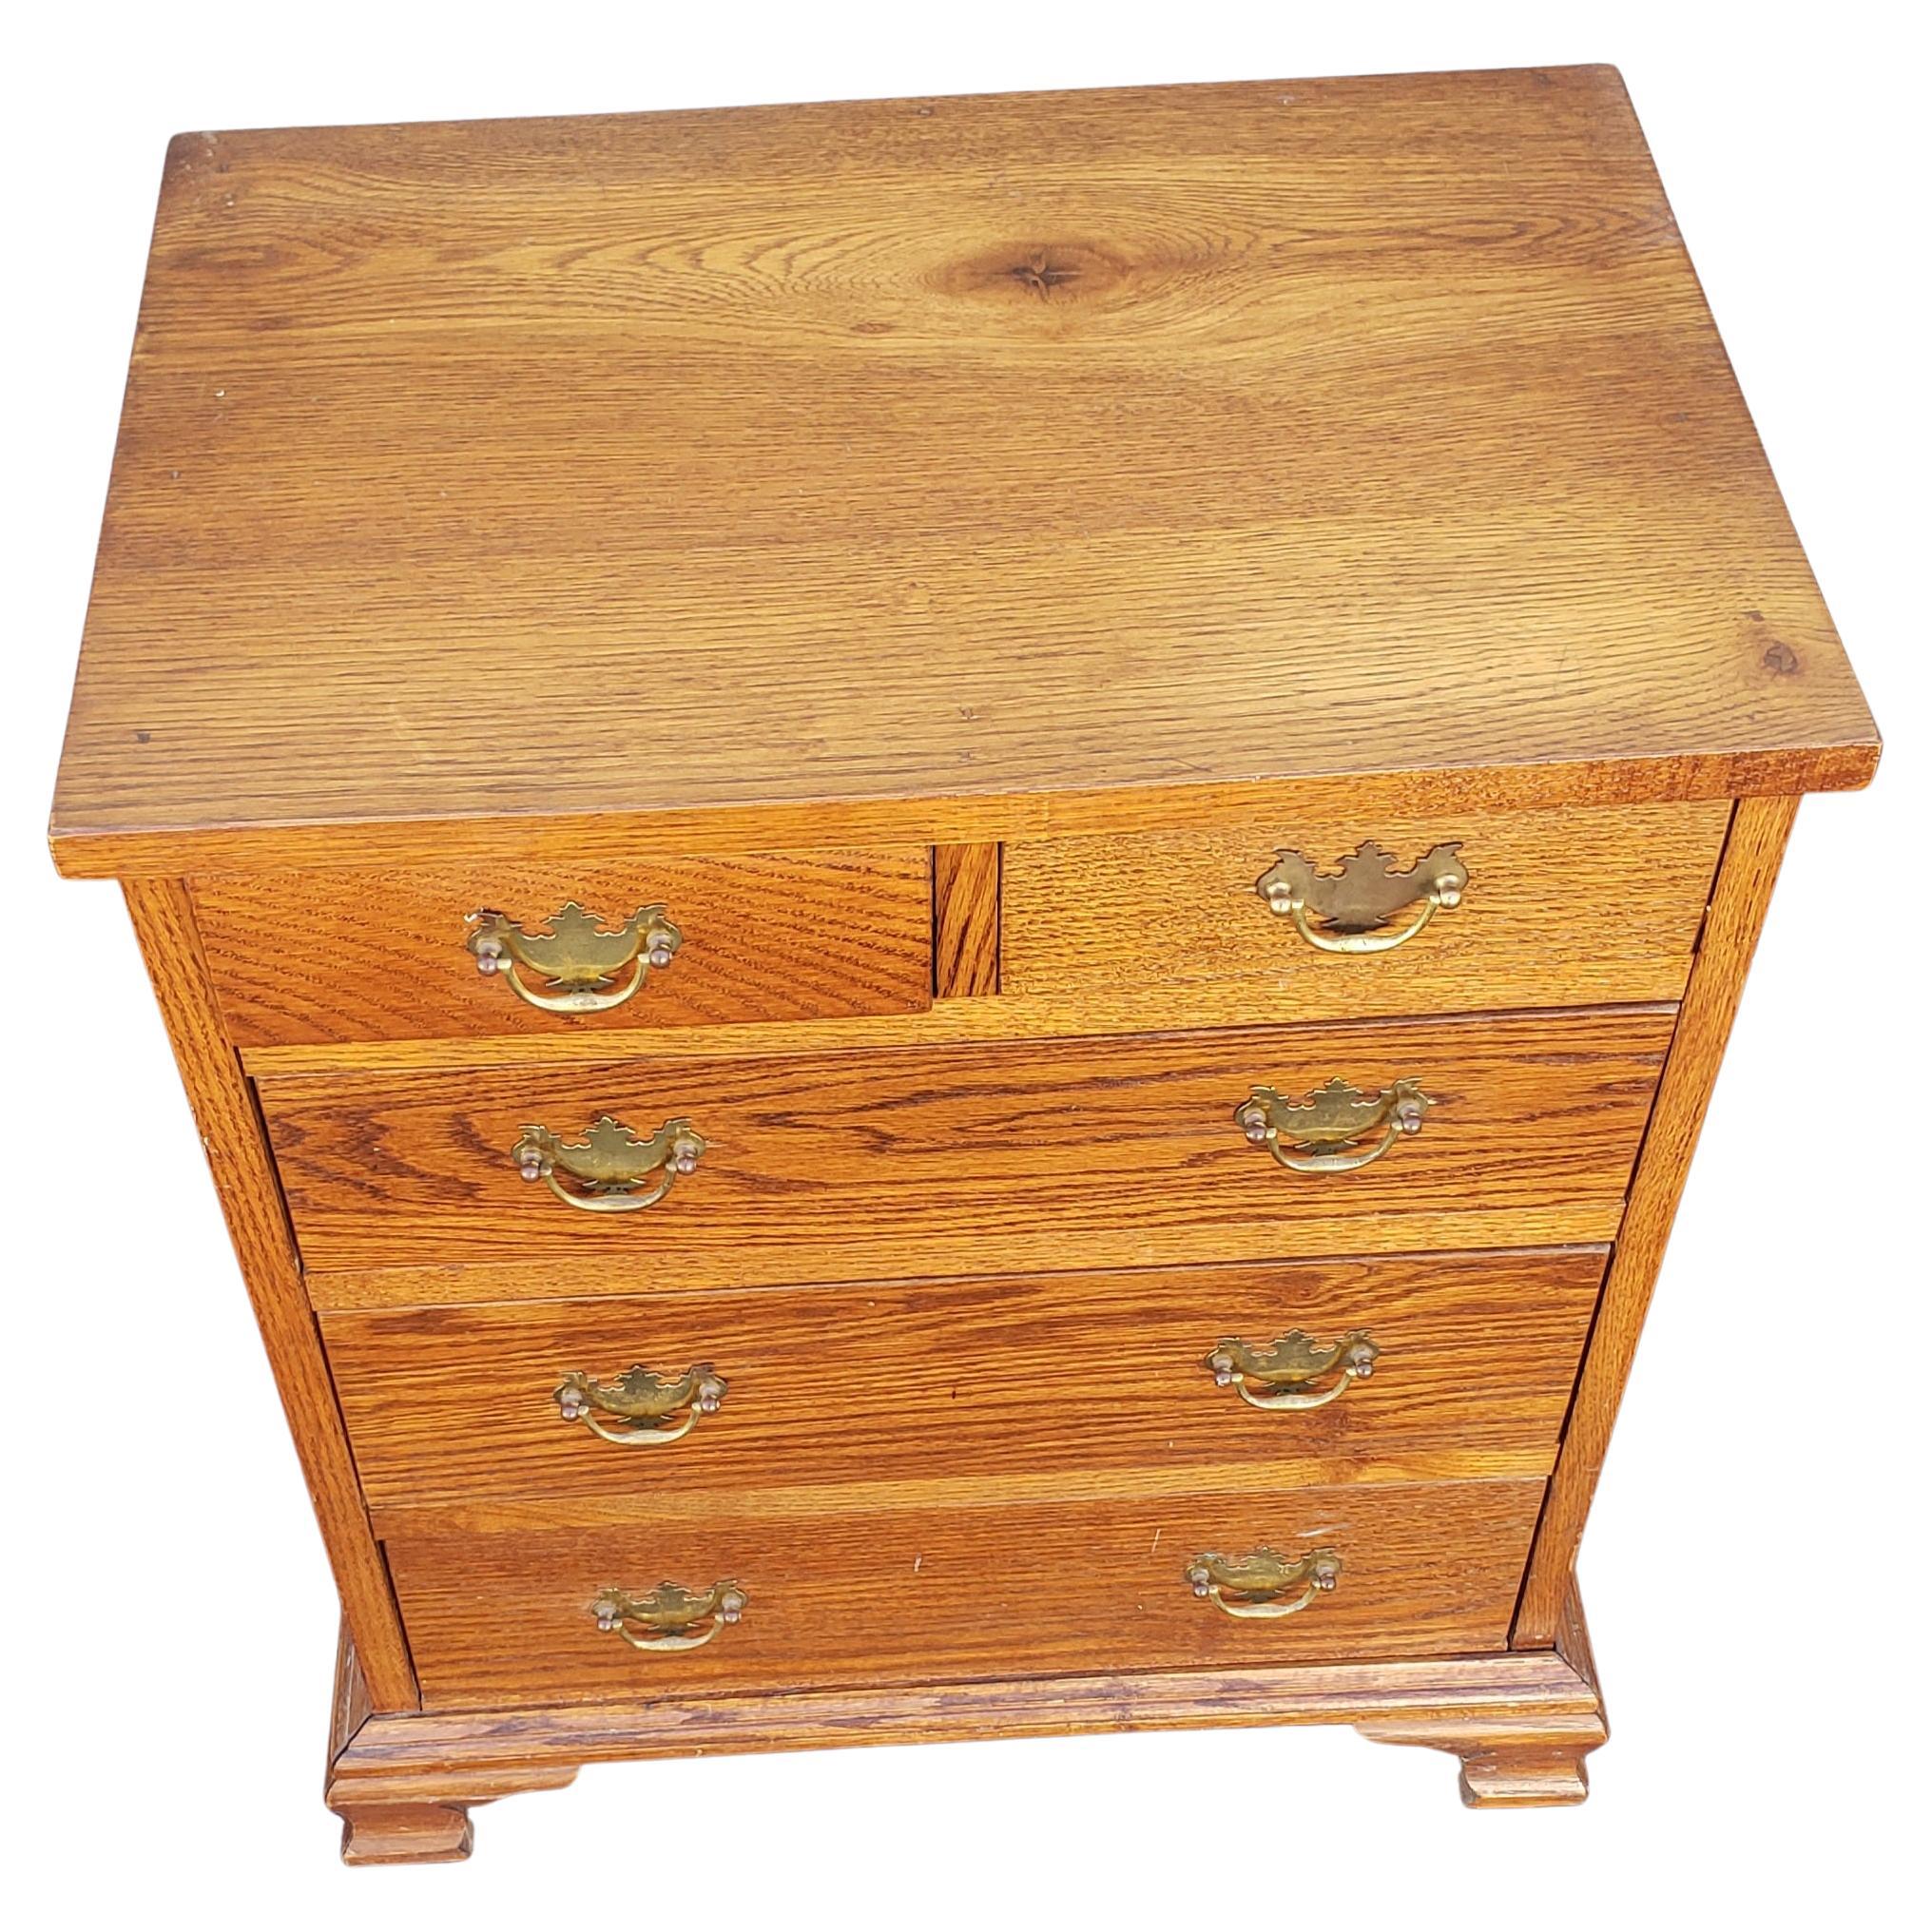 Midcentury very solid oak 5-drawer bedside chest of drawers / nightstand in great condition with dovetail drawer construction in all solid wood. Drawers functioning perfectly. All wood backing. Use as a nighstand or just as a small storage chest.